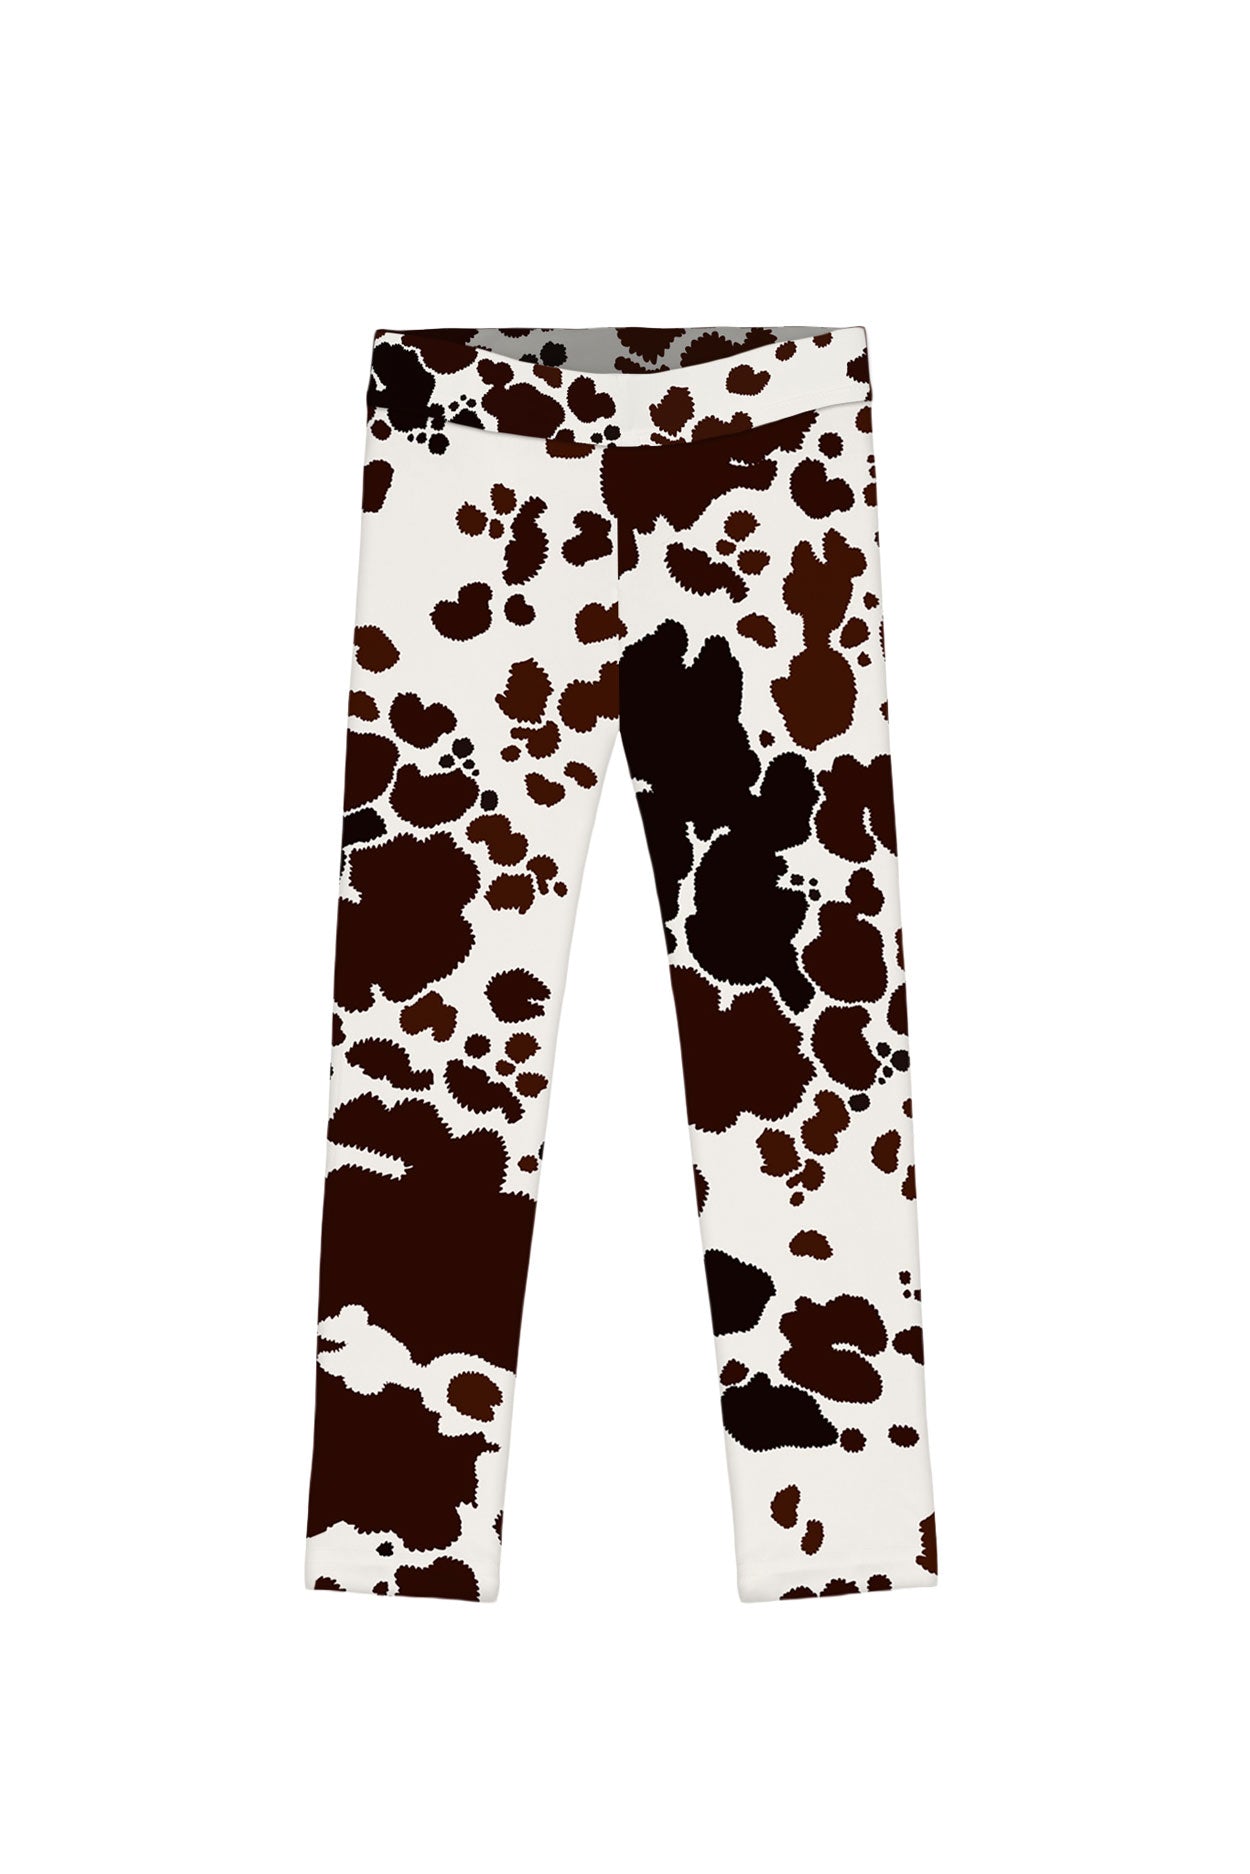 Cowgirl Lucy White Brown Cow Animal Print Best Summer Leggings - Girls - Pineapple Clothing